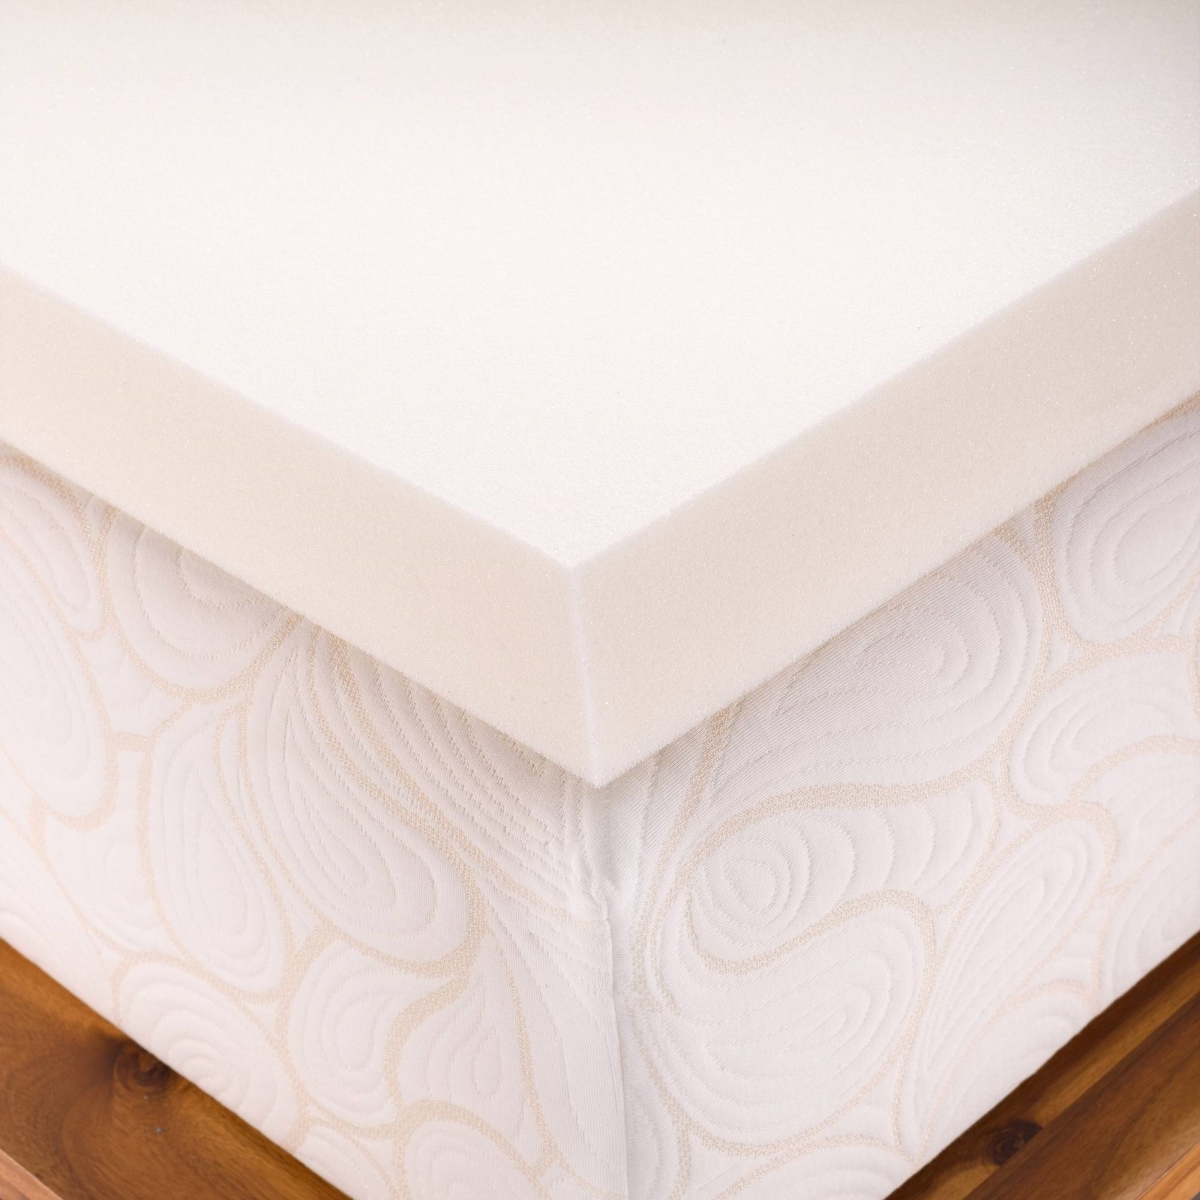 Picture of Memory Foam Solutions UBSPUMC2805 California King 5 Inch Thick  Medium Firm Conventional Polyurethane Foam Mattress Pad Bed Topper Made in the USA